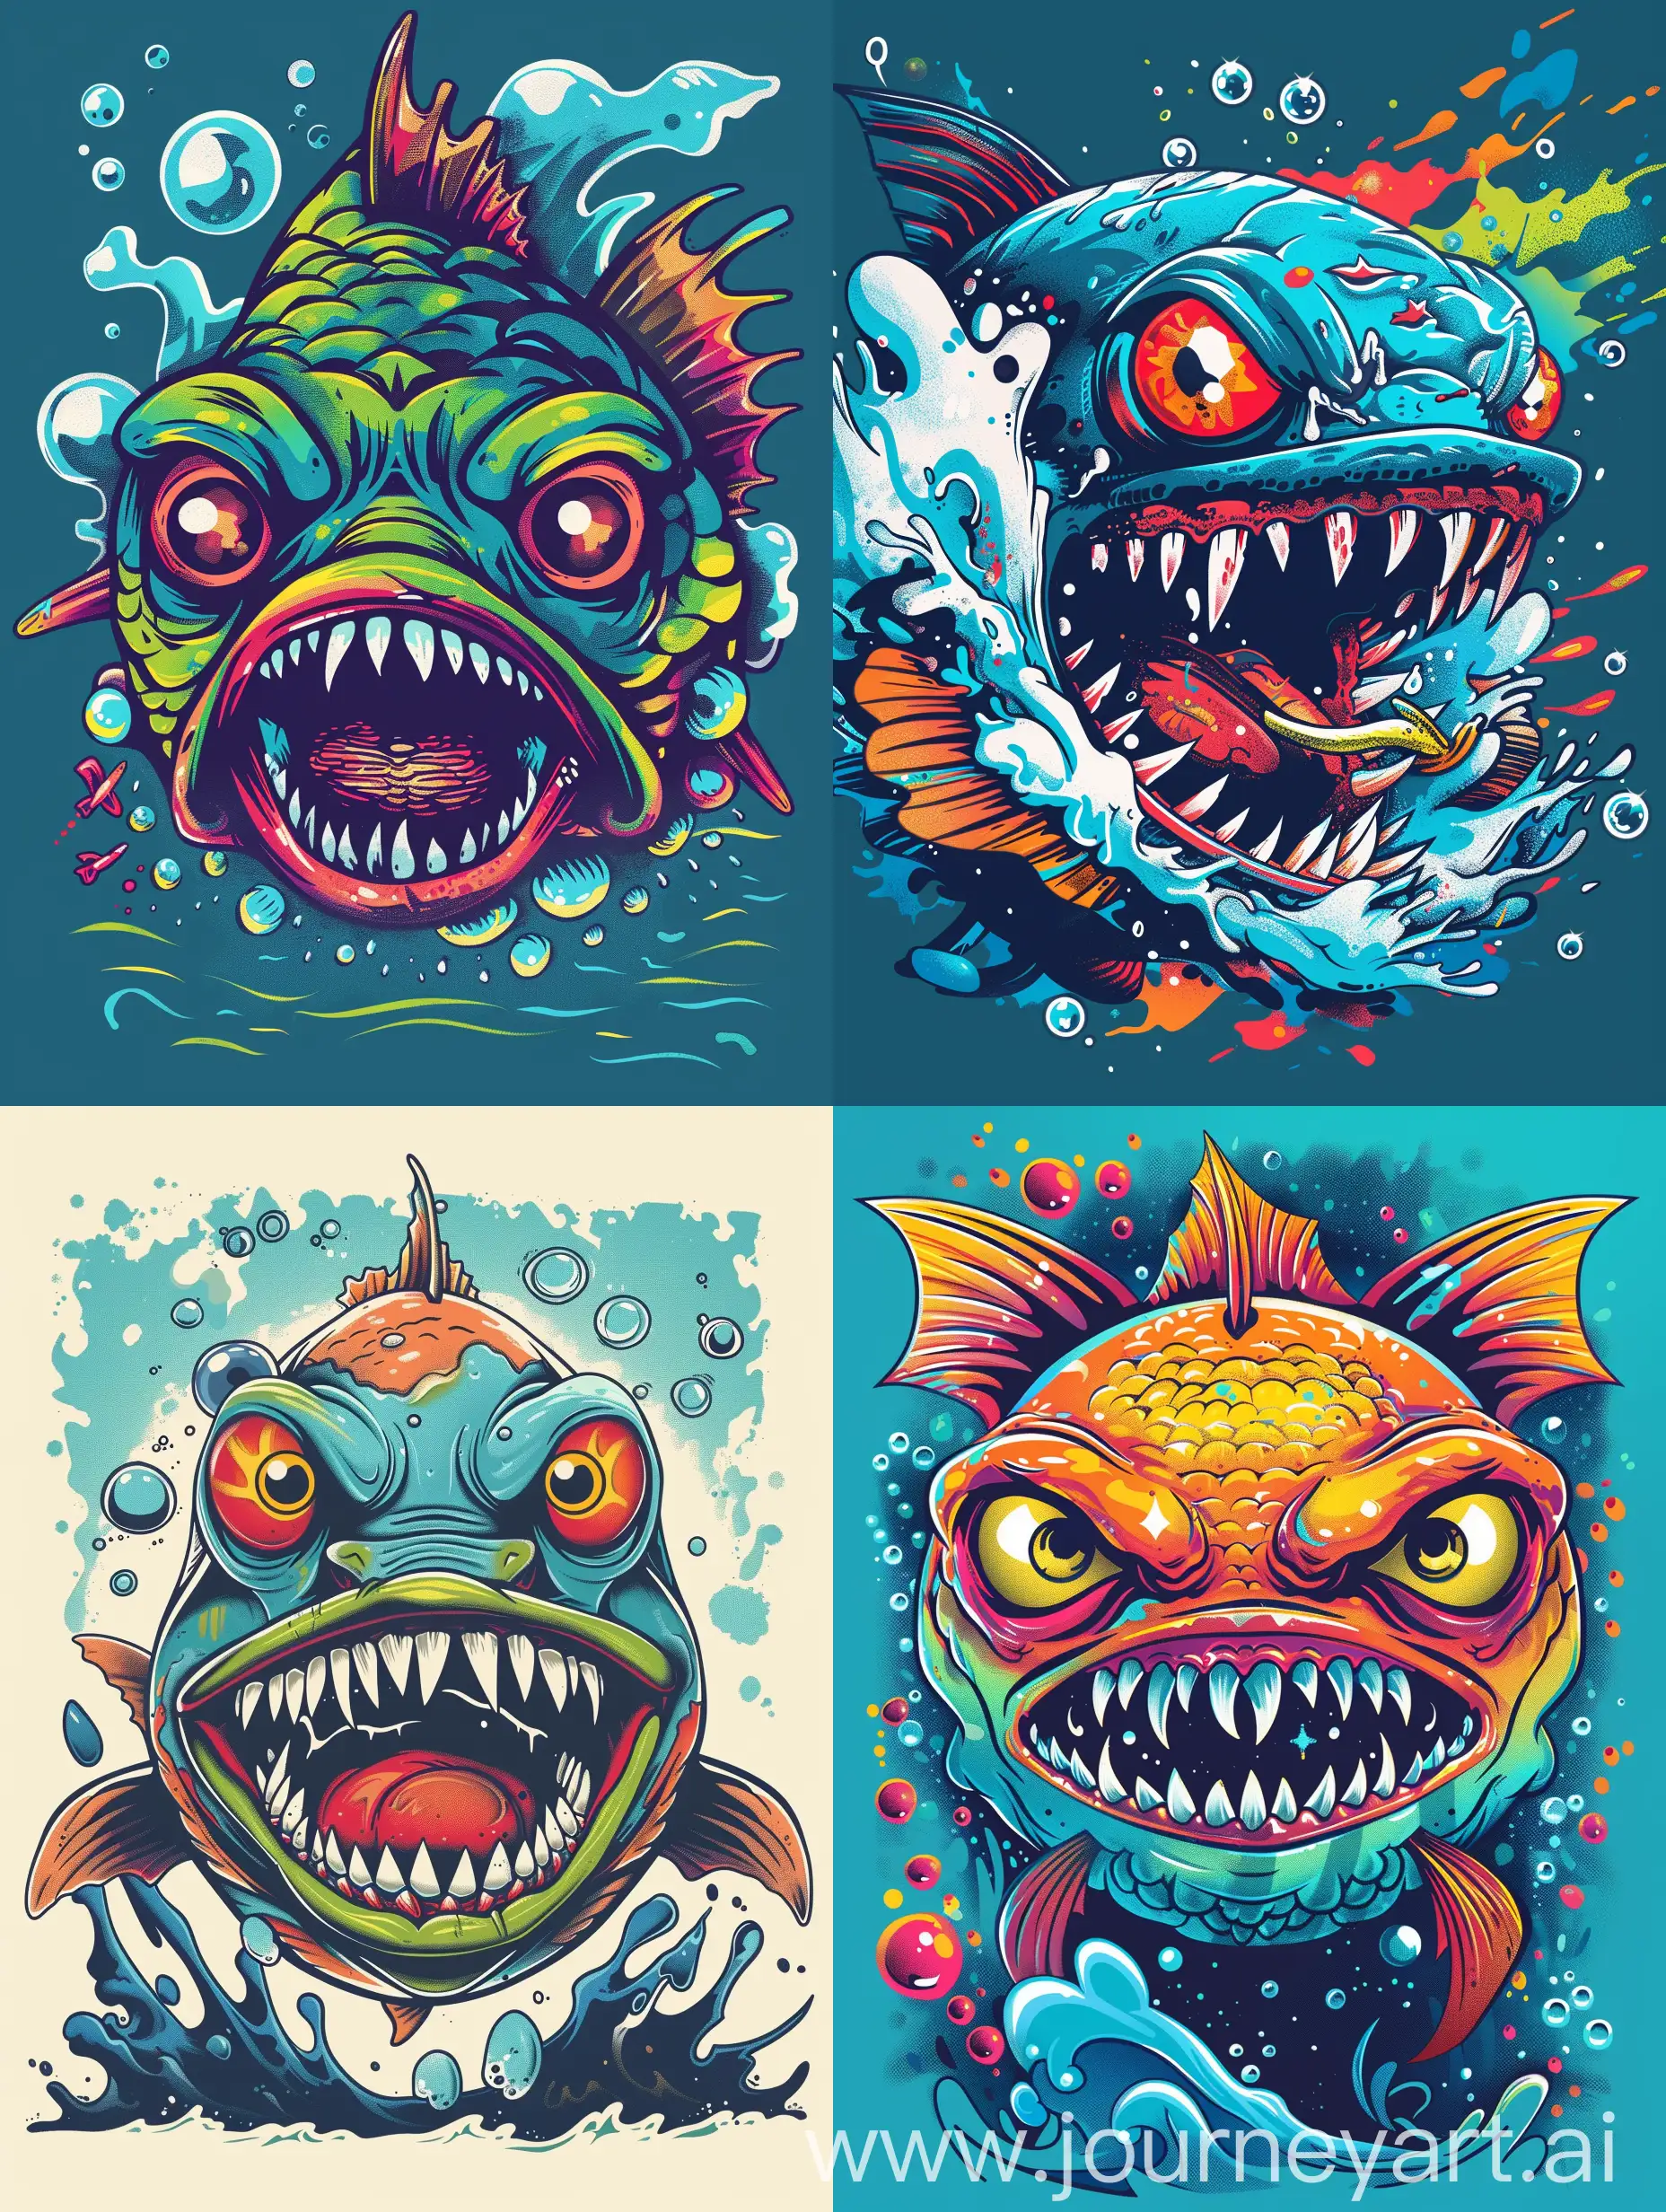 a graphic design for a t-shirt featuring a funny angry piranha. The piranha should have exaggerated cartoonish features such as big, bulging eyes, sharp teeth, and a furrowed brow to emphasize its anger in a humorous way. Use a vibrant and colorful palette with bright blues, greens, reds, and yellows. The background should be simple, perhaps with bubbles or waves, to highlight the piranha. The overall style should be playful and engaging, with bold lines and a fun, cartoonish aesthetic. --v 5 --ar 3:4 --q 2